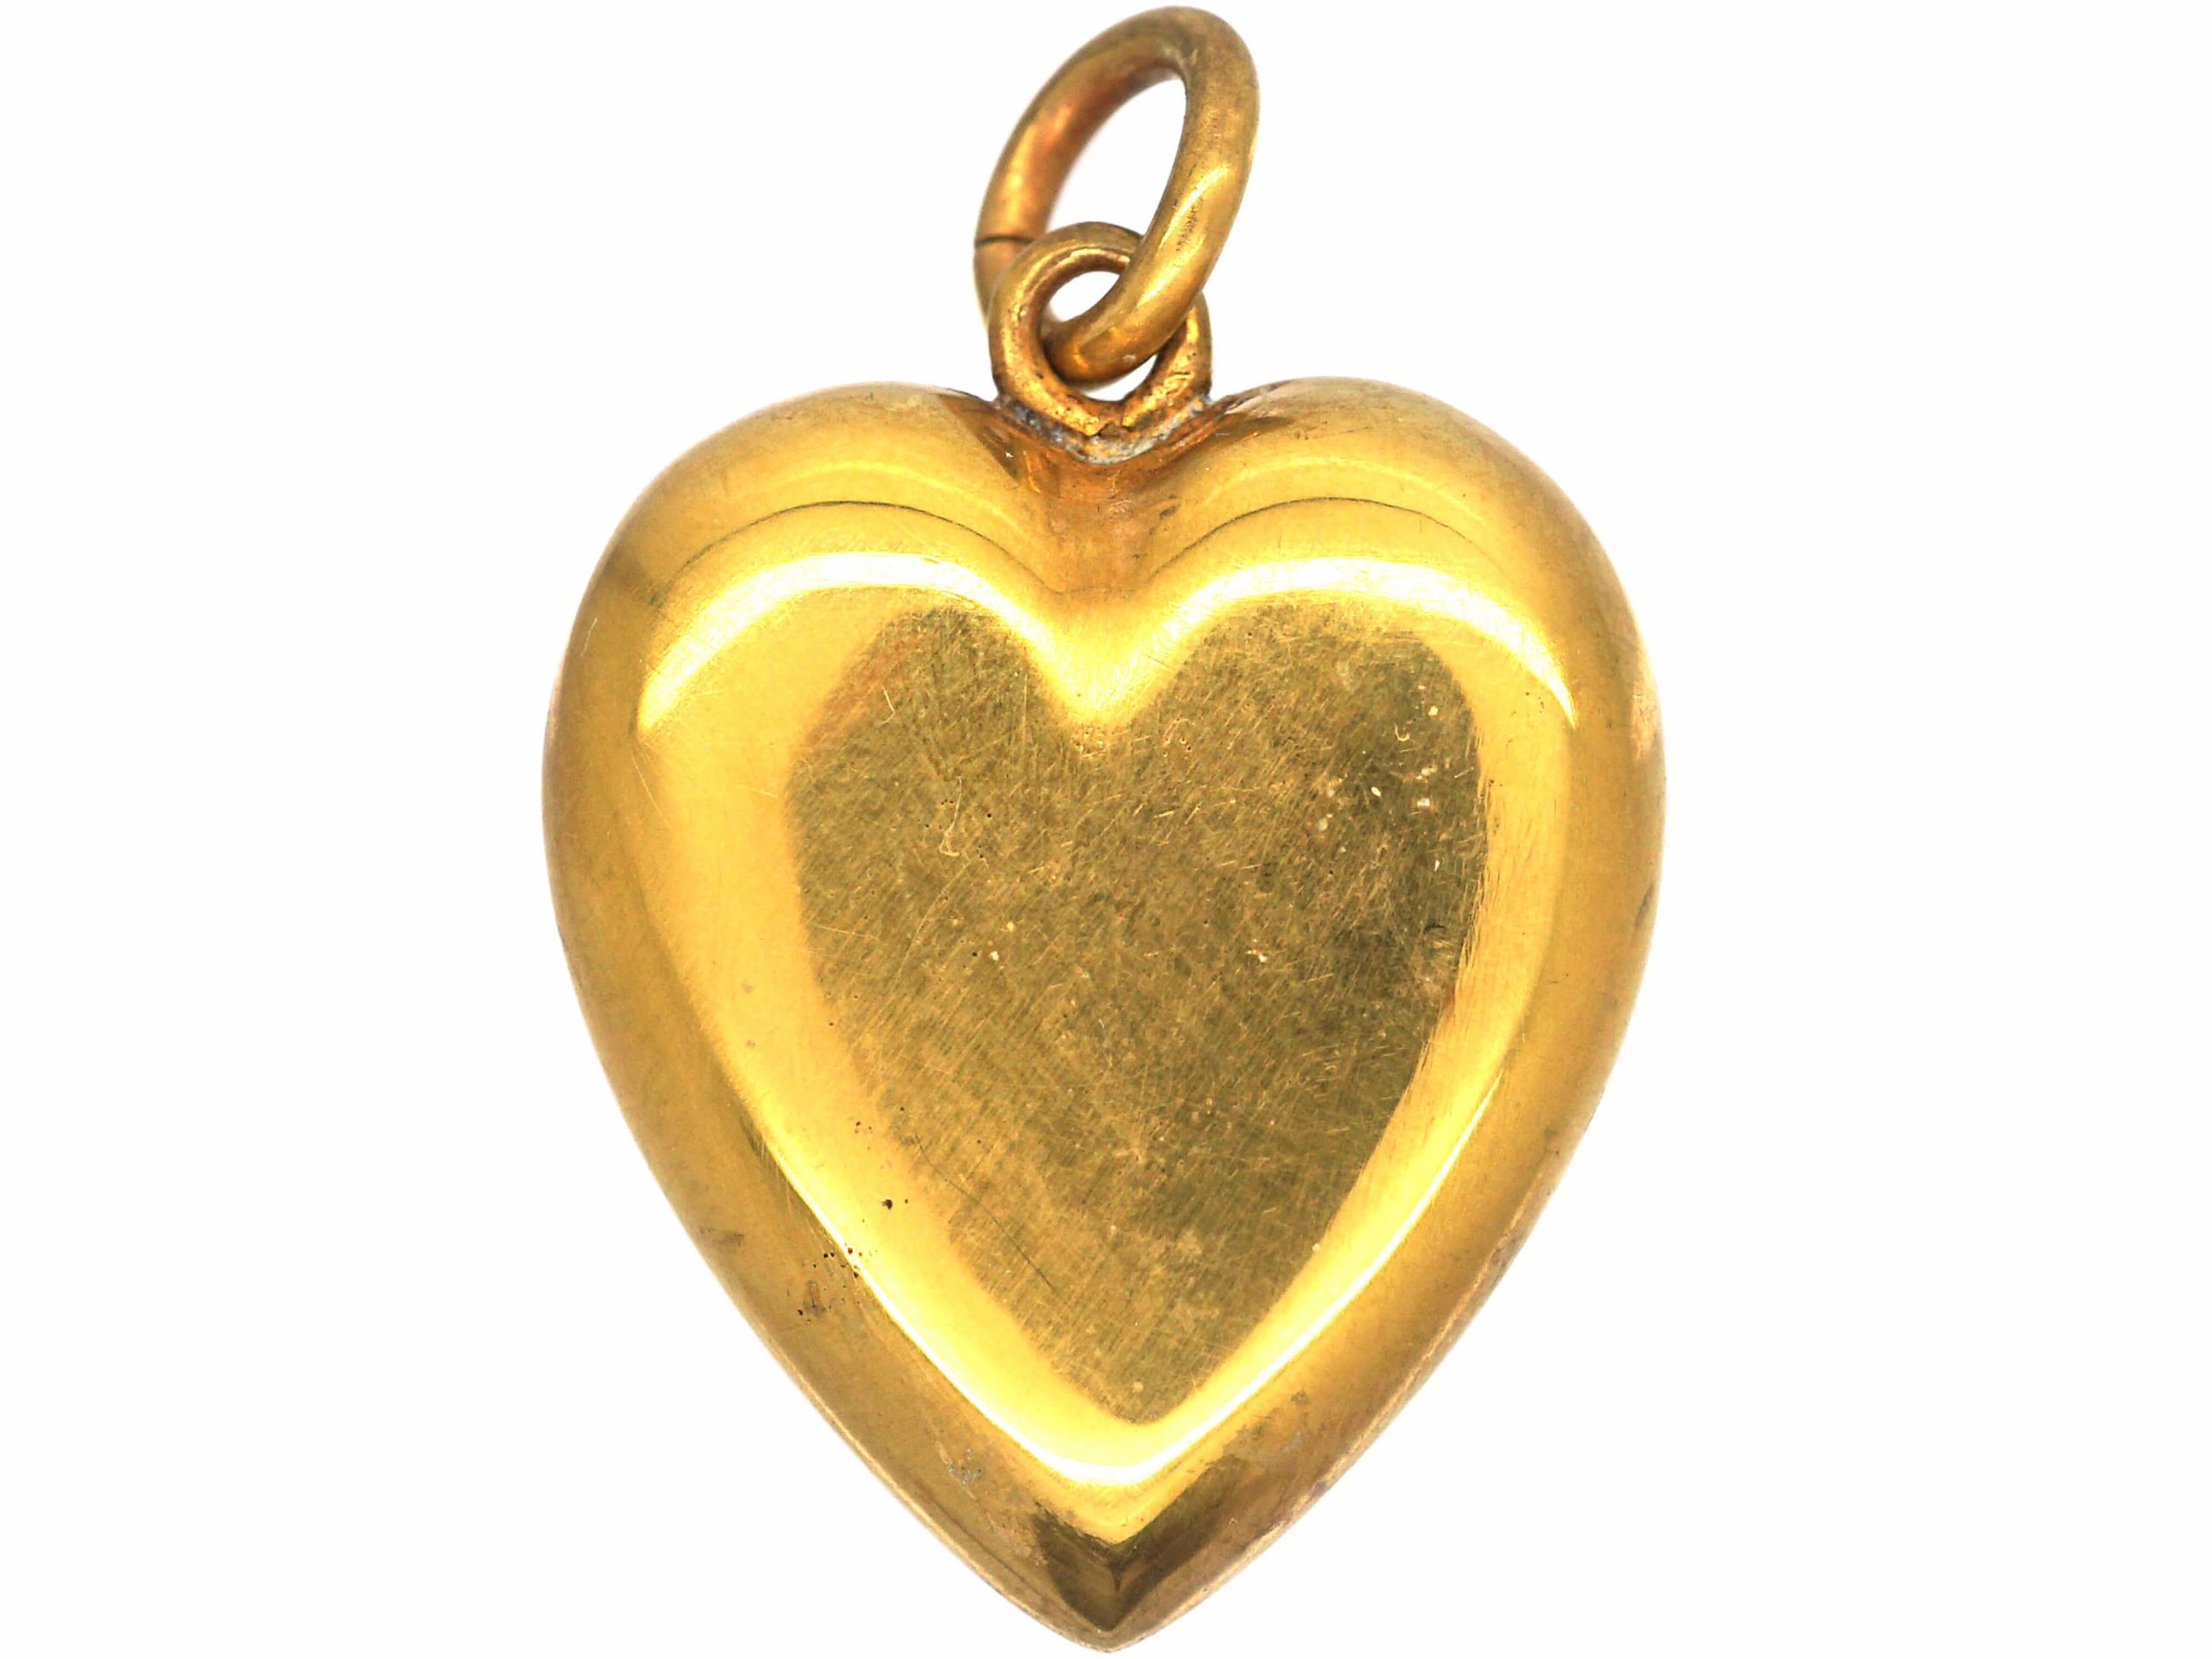 Edwardian 18ct Gold Heart Shaped Pendant (541R) | The Antique Jewellery ...